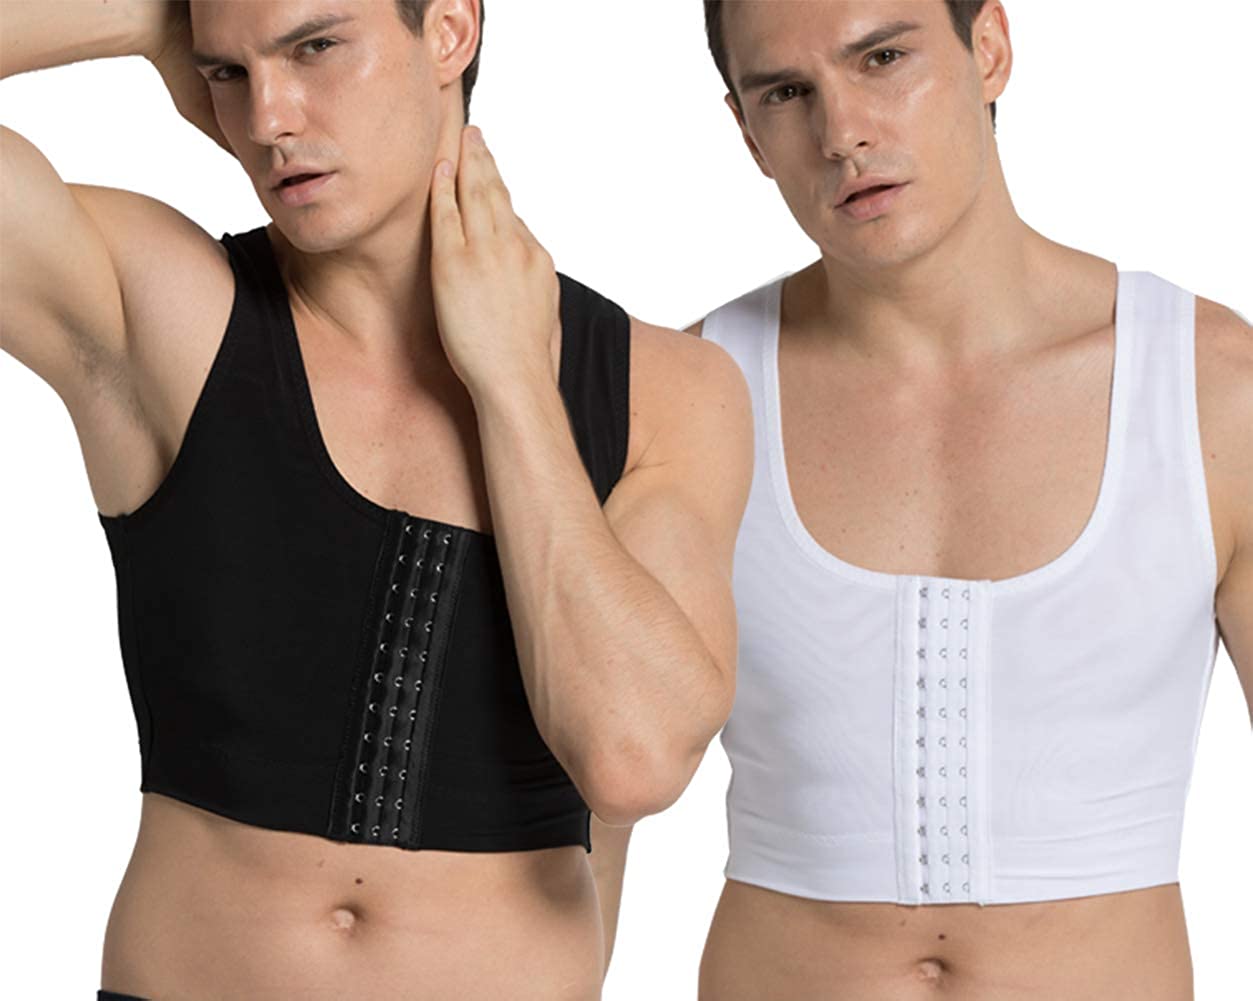 iYunyi Men's Body Shaper Chest Binder Flat Compression 3 Rows Clasp Bust Corset Vests